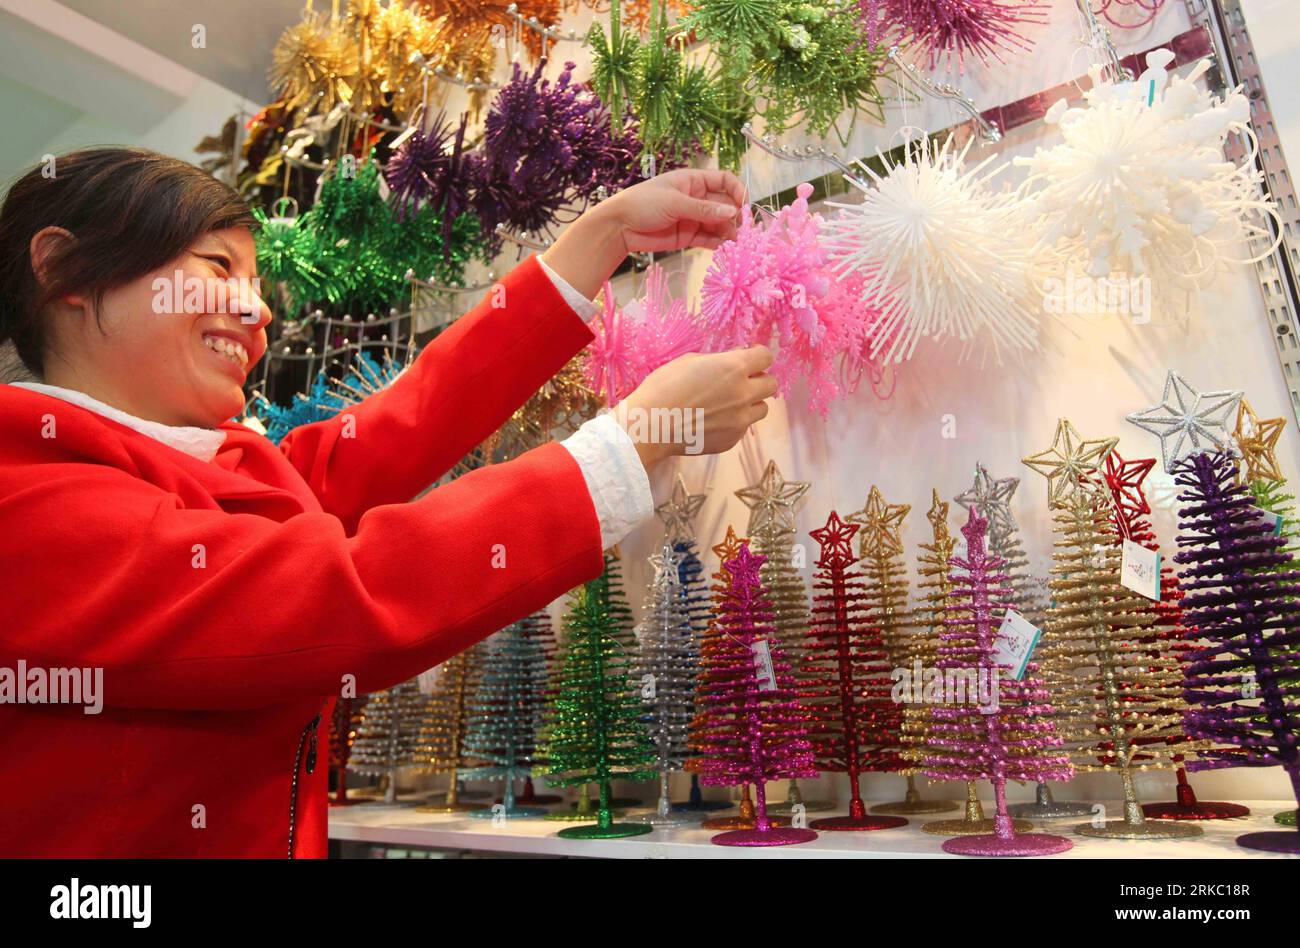 Bildnummer: 54638633  Datum: 12.11.2010  Copyright: imago/Xinhua (101115) -- WENZHOU, Nov. 15, 2010 (Xinhua) -- A manufacturer displays newly designed Christmas ornaments in Ruian City of east China s Zhejiang Province, on Nov. 12, 2010. As the world gets ready to celebrate the West s biggest festival, Christmas, next month, Chinese toymakers are not so cheery, as the appreciation of Chinese currency Yuan crimps their already paper-thin profits. Around 80 percent of the world s Christmas toys, trees and decorations are churned out of factories in southern China. Despite the huge market share, Stock Photo